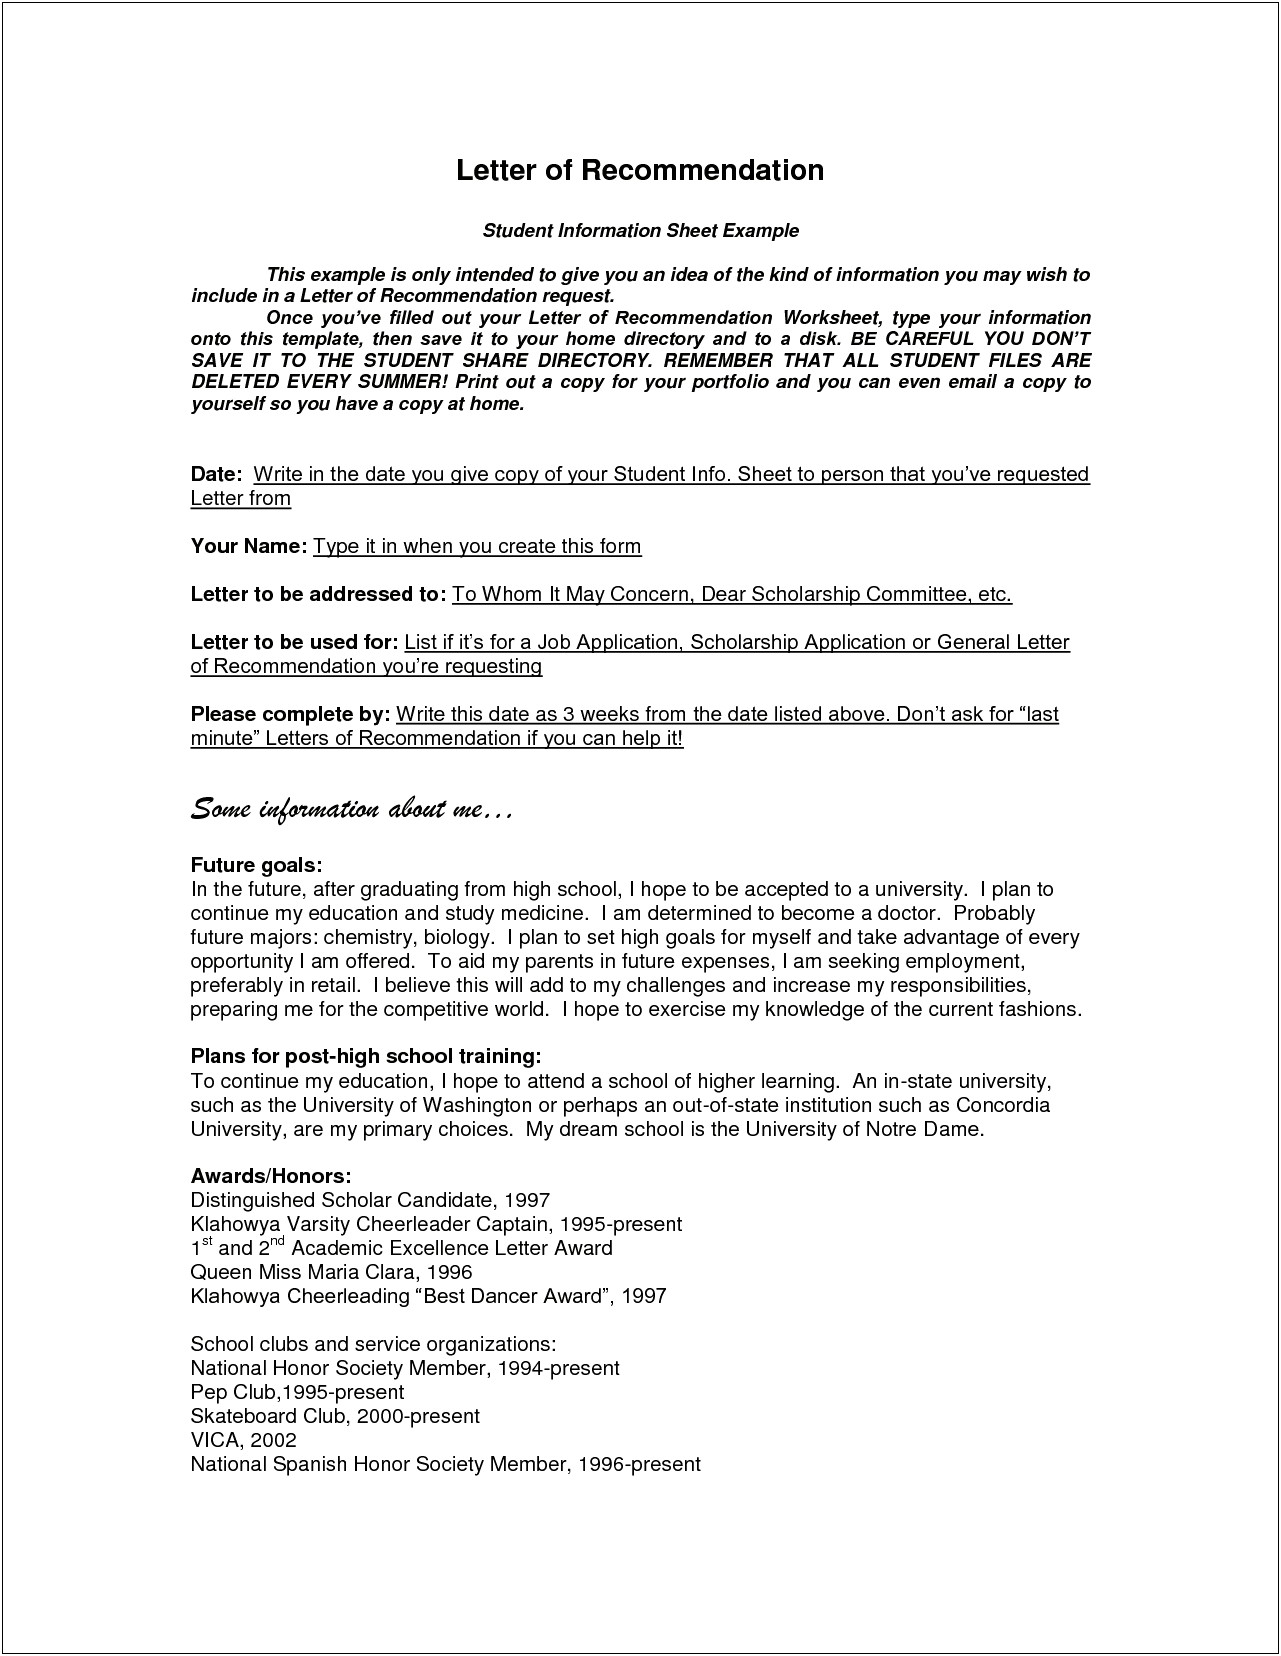 Resume Template For Asking For Recommendation Letter